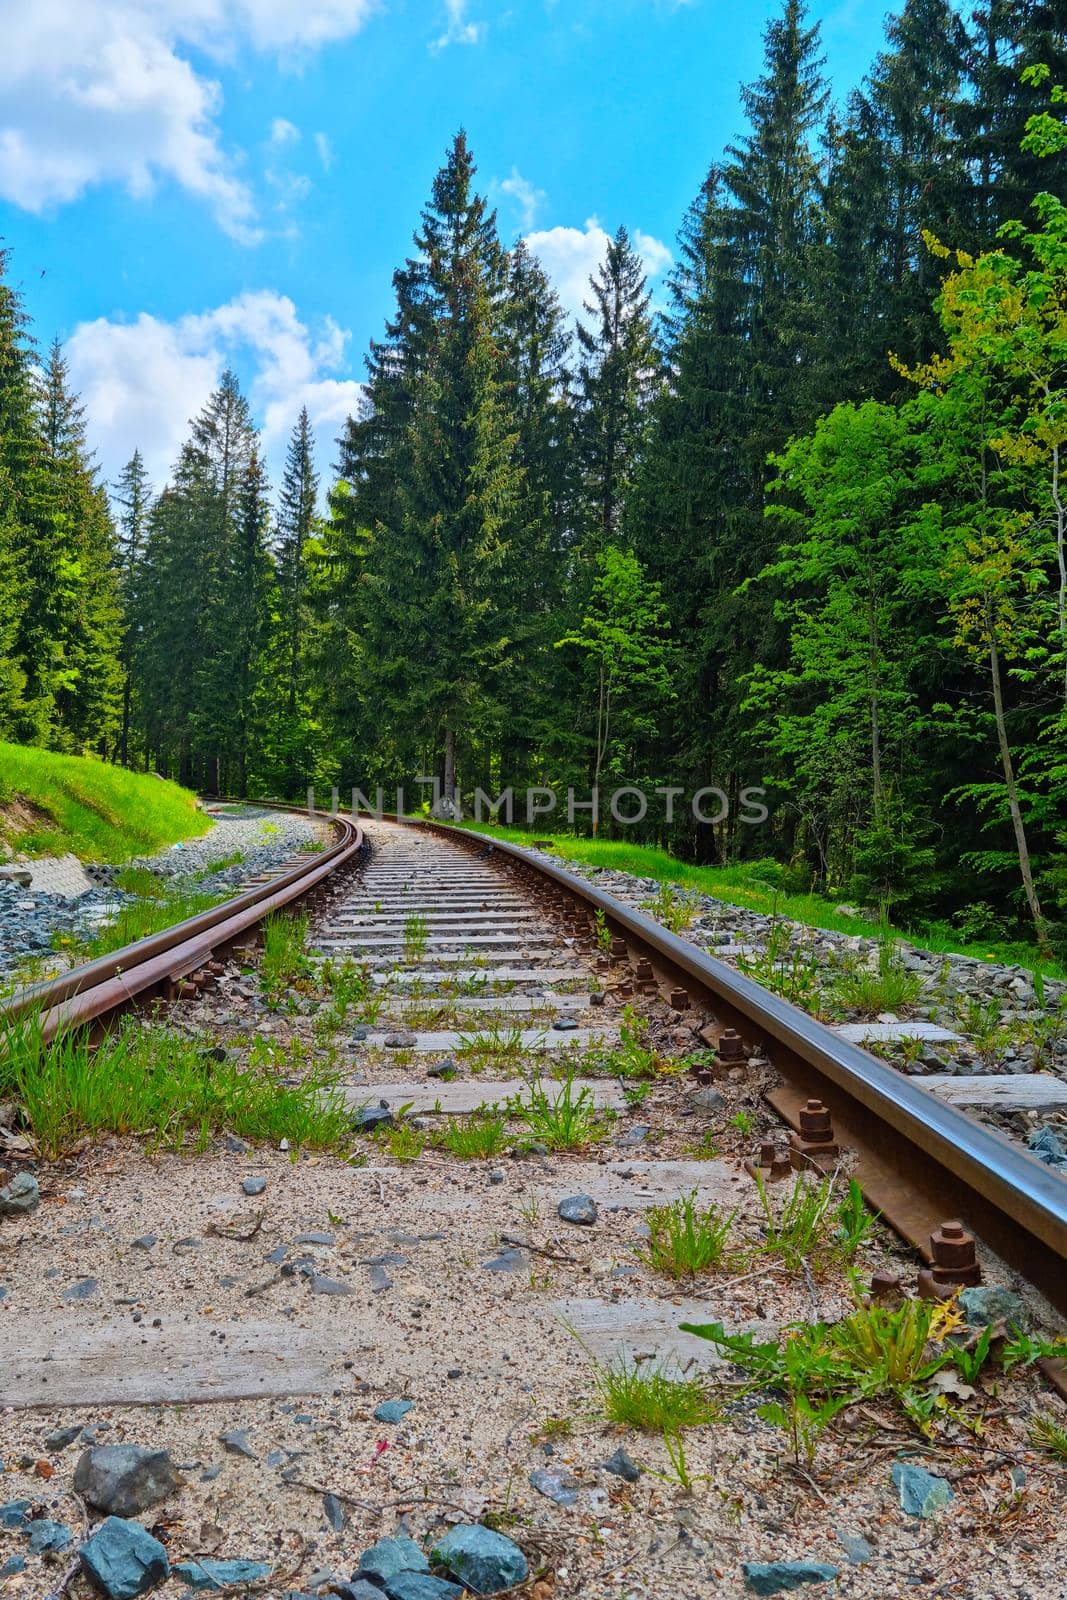 The picturesque railway passes through a green forest